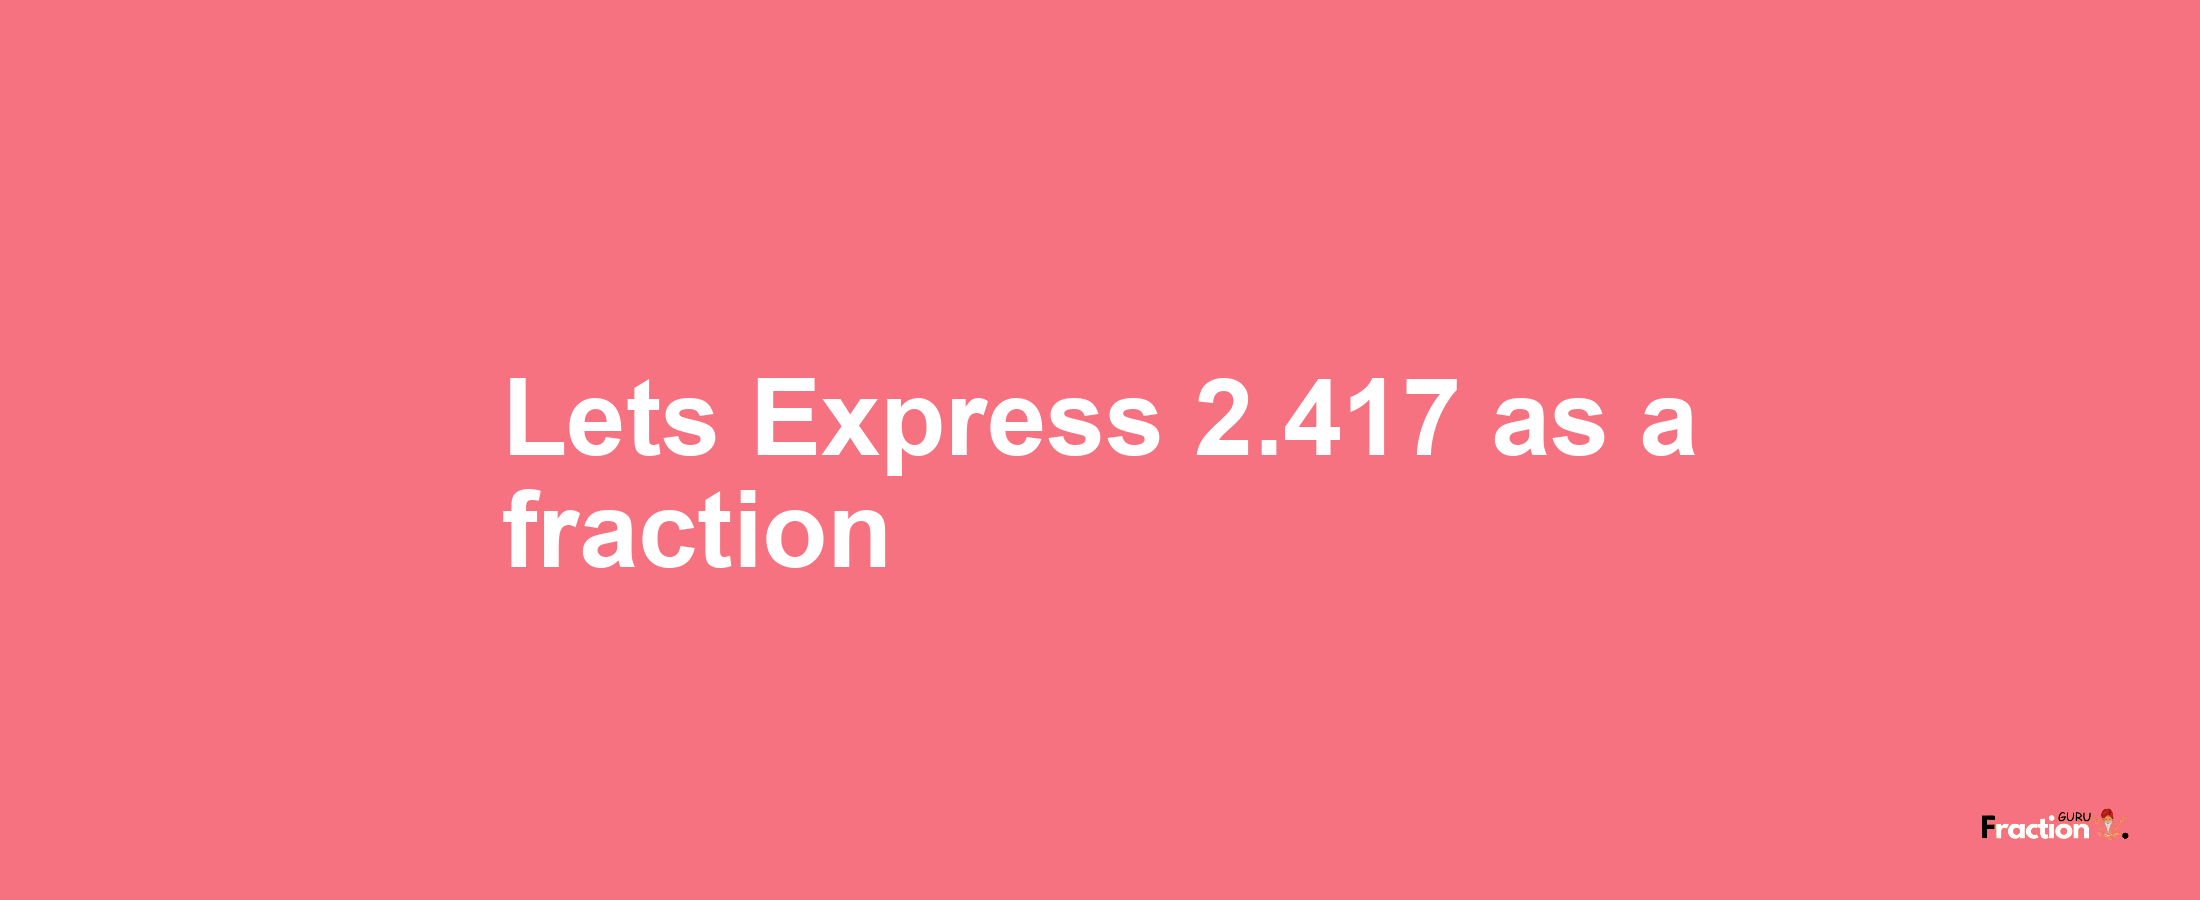 Lets Express 2.417 as afraction